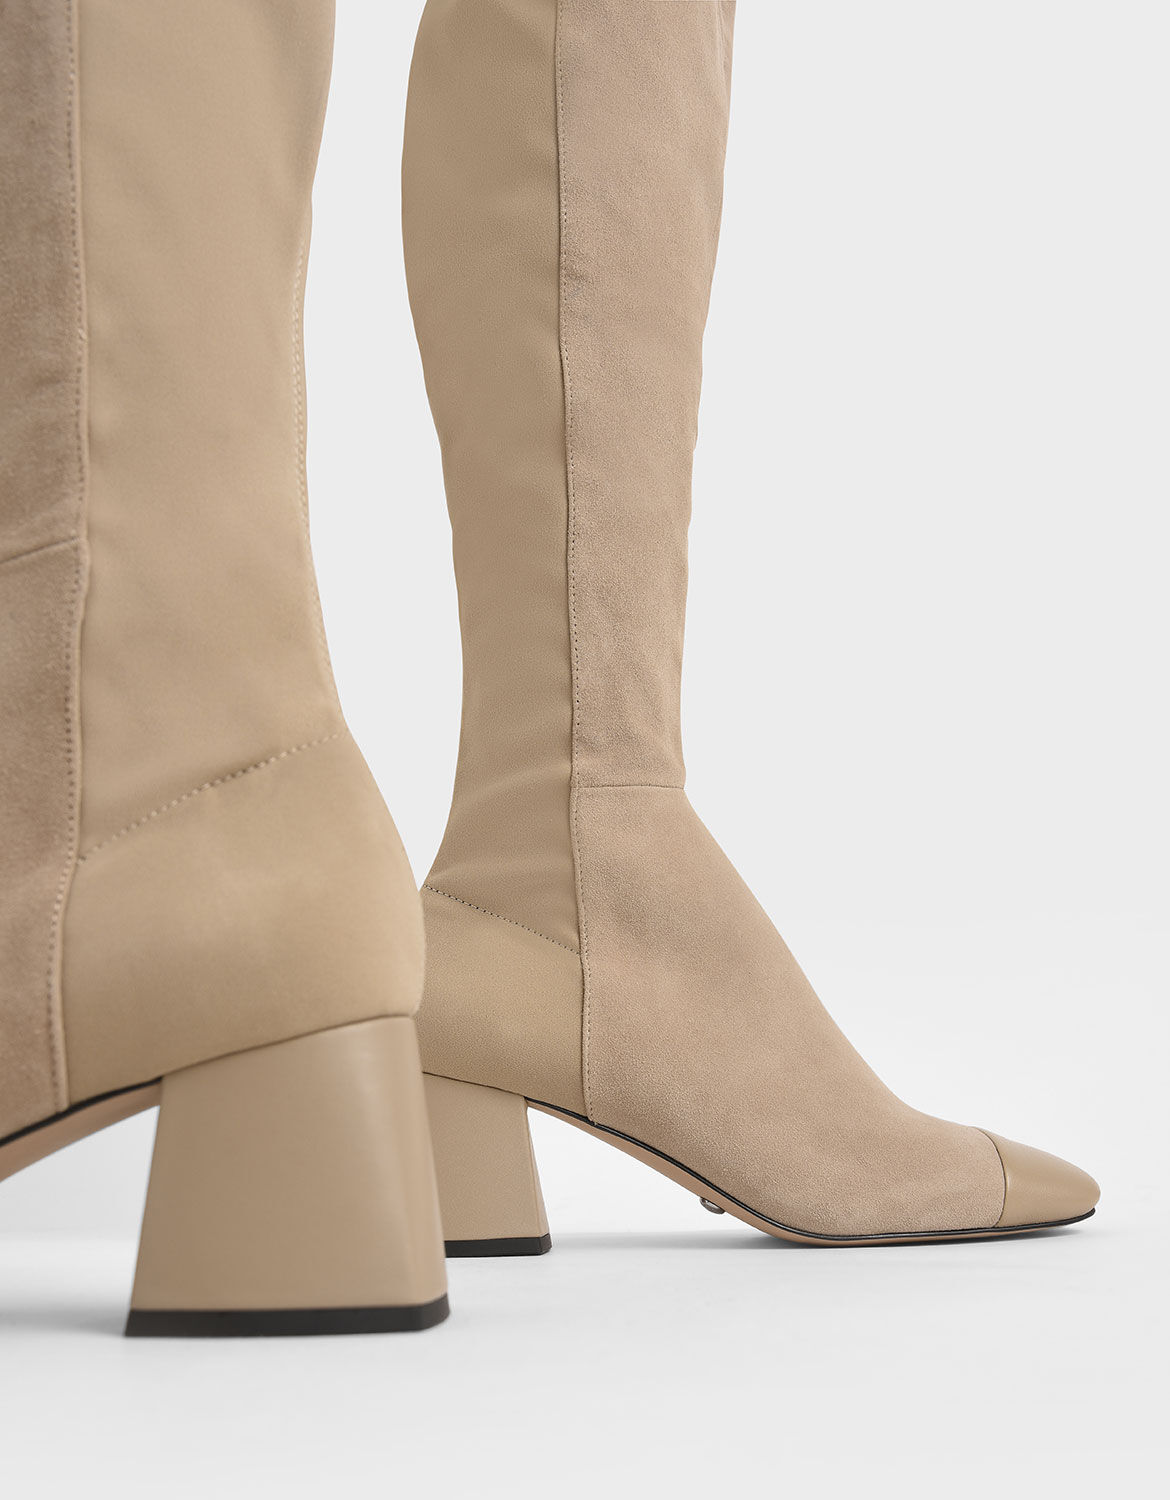 real suede thigh high boots